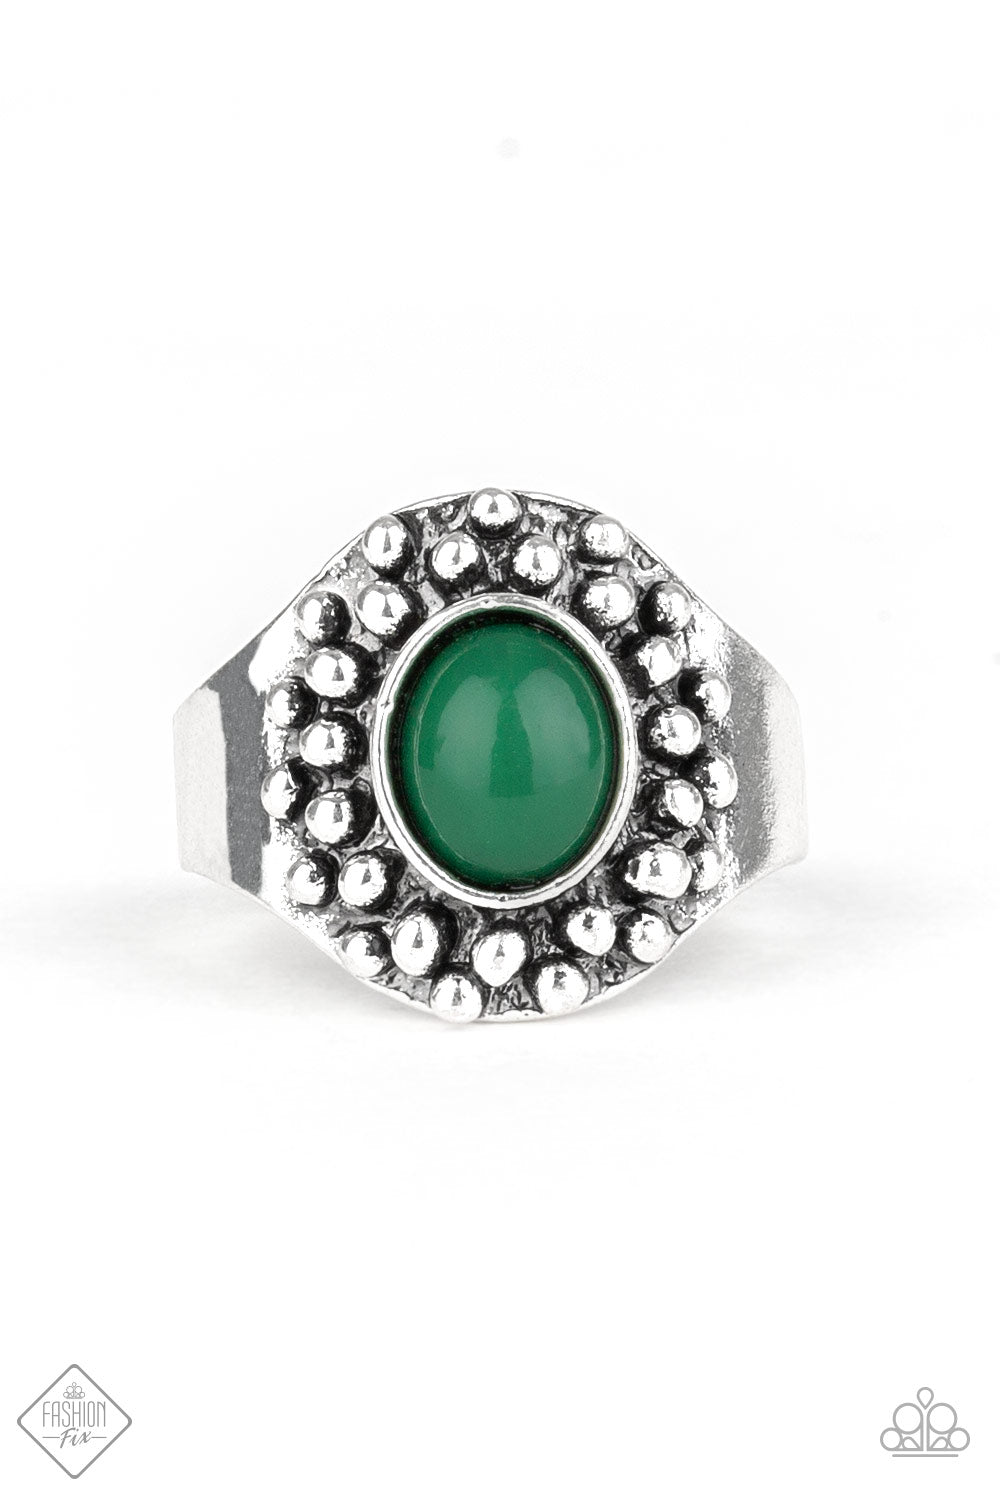 Please and Thank You Fashion Fix Green Ring September 2019 - TheMasterCollection